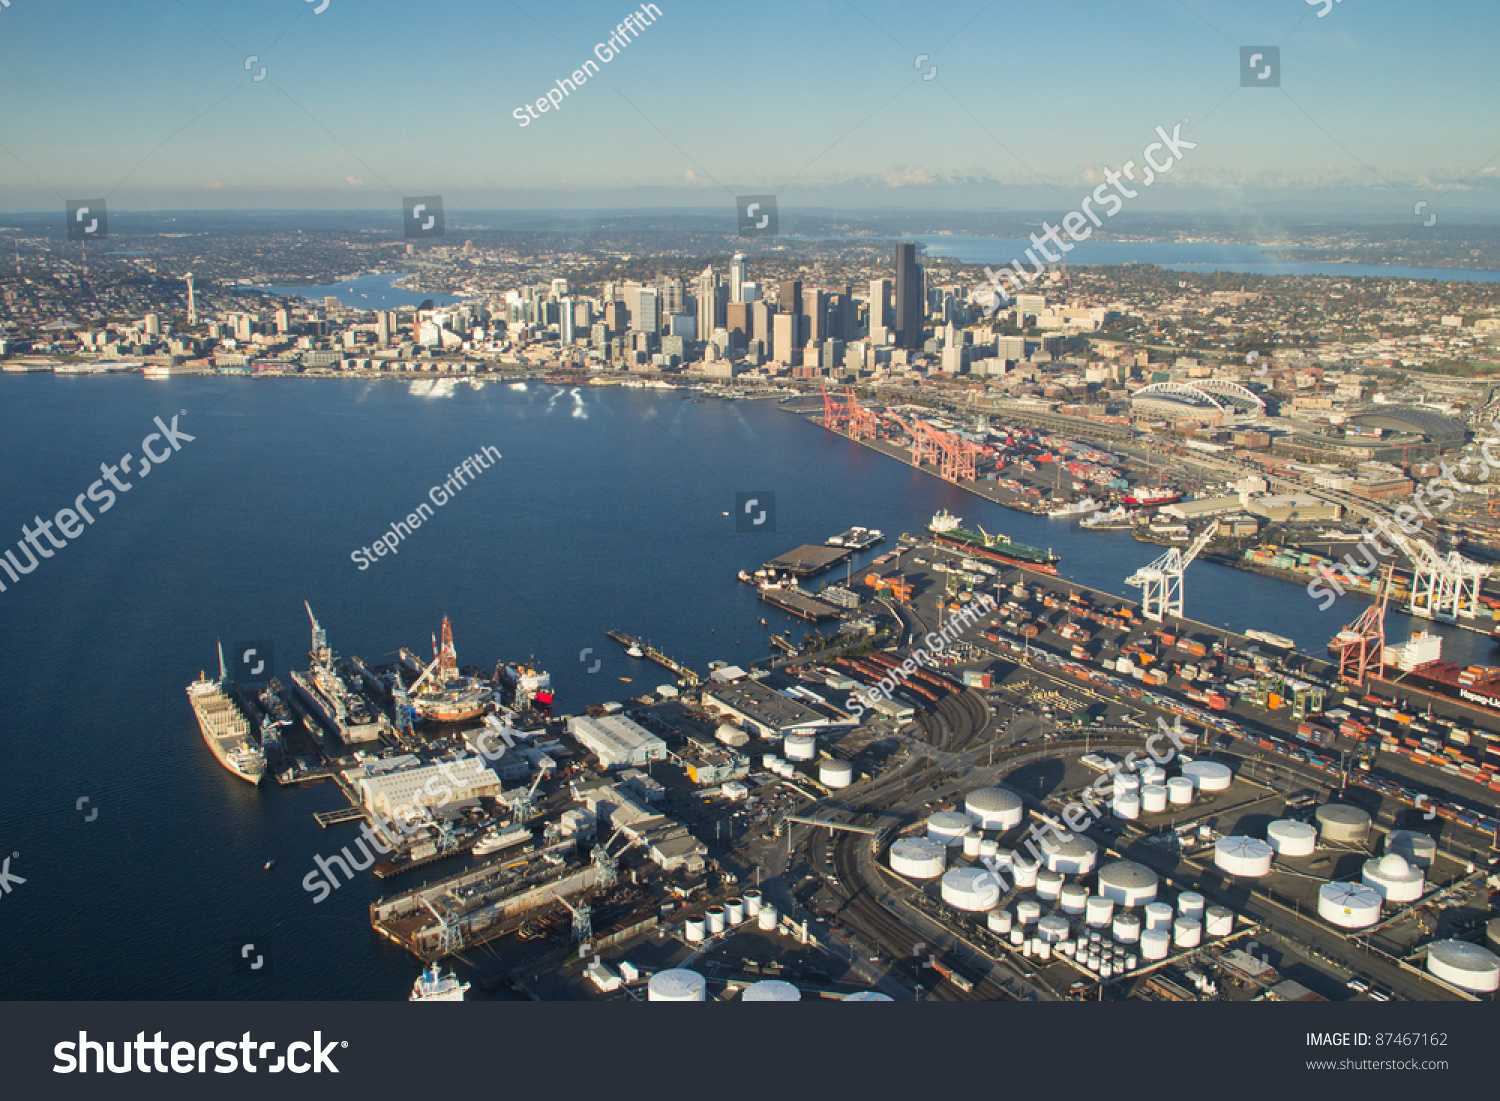 Seattle, Elliott Bay and the Port from above West Seattle #87467162